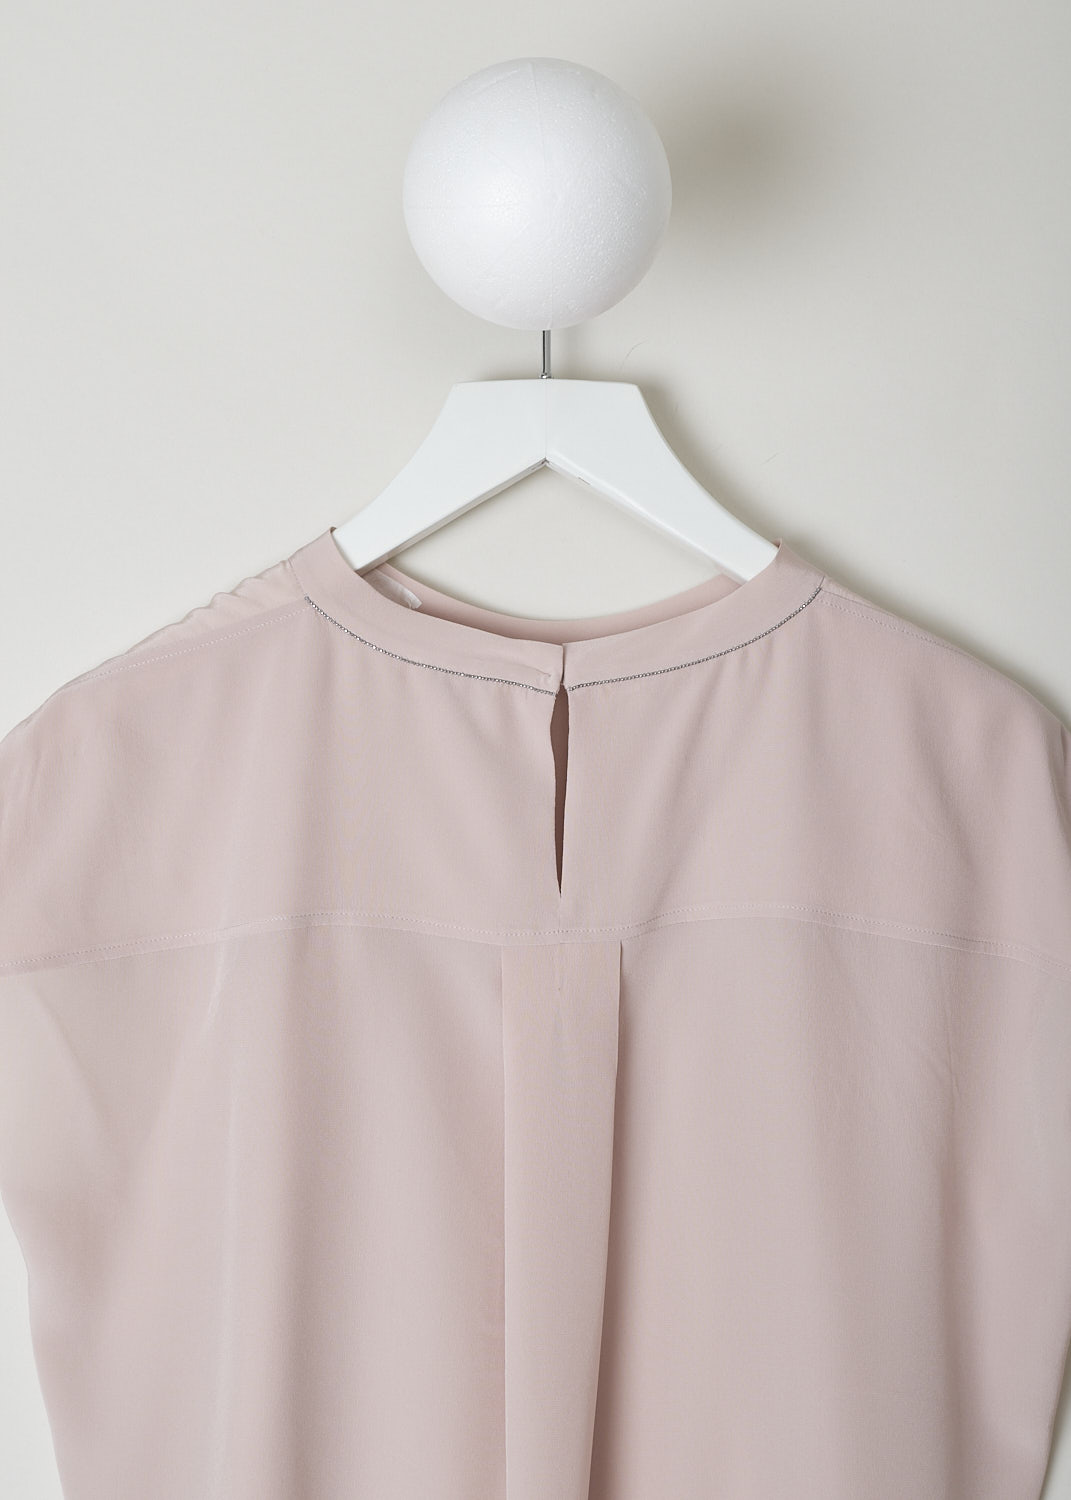 BRUNELLO CUCINELLI, BLUSH PINK SILK TOP, MB993EQ100_C8577, Pink, Detail, This blush pink silk top has a rounded neckline and subtle cap sleeves. A paneled look is created by the two seams running vertically in the front. The top has a rounded hemline with a asymmetrical finish, meaning the back is longer than the front. In the back, a single button in the neck functions as the closure option, with a row of Monili beads decorating the seam. Also in the back, a single box pleat can be found.
